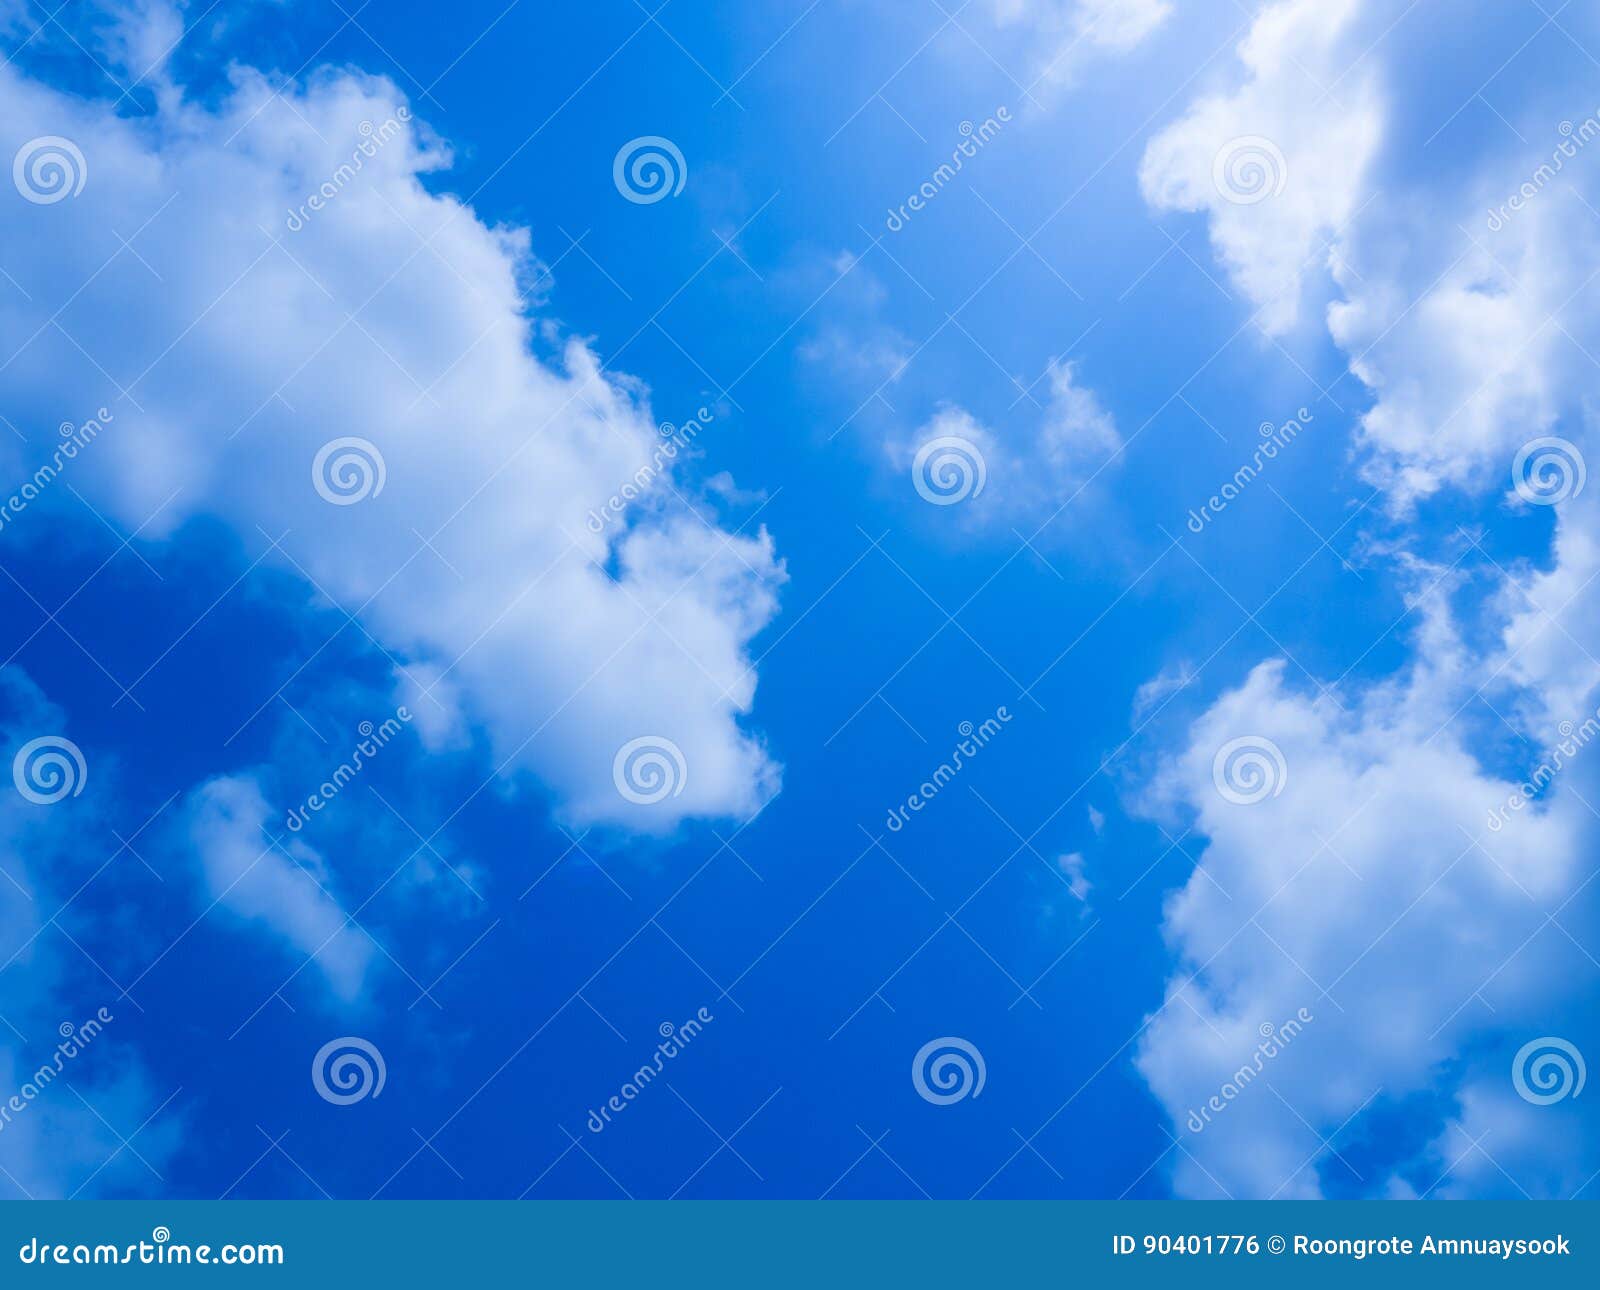 Cute blue sky with cloud stock photo. Image of overcast - 90401776